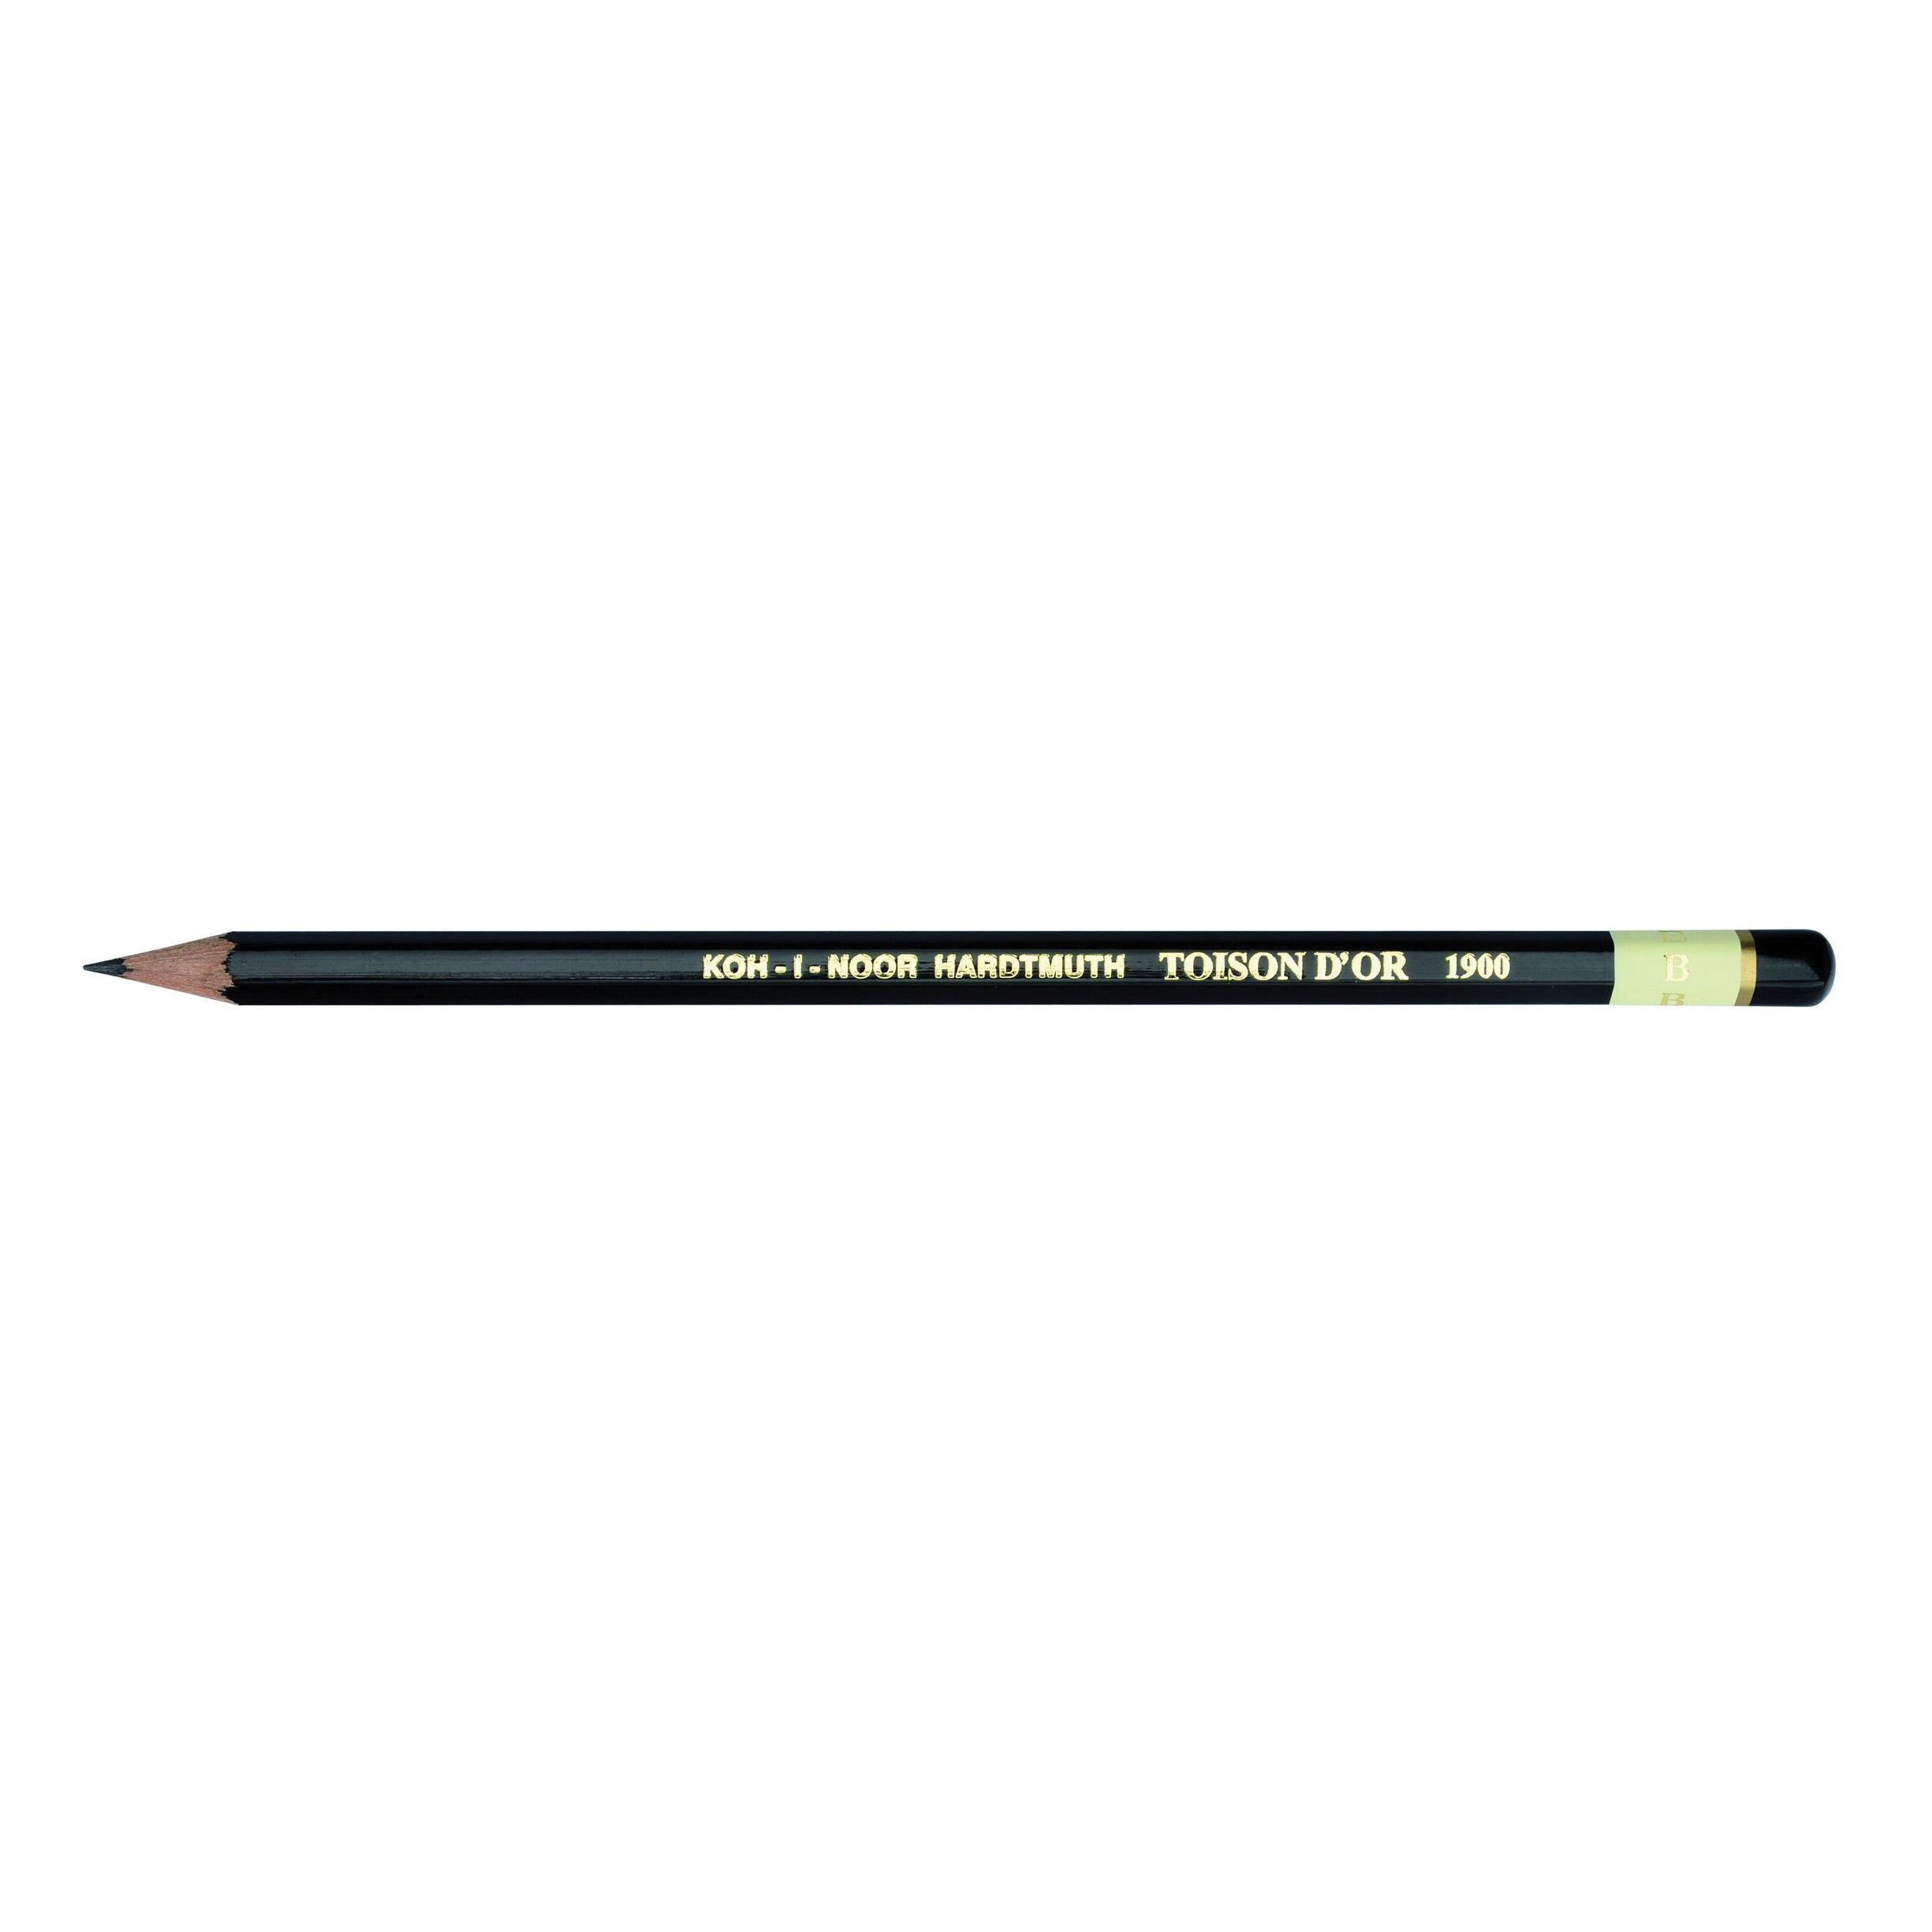 graphite pencils for drawing and writing lined inside black little basket  oon the black background, Stock image